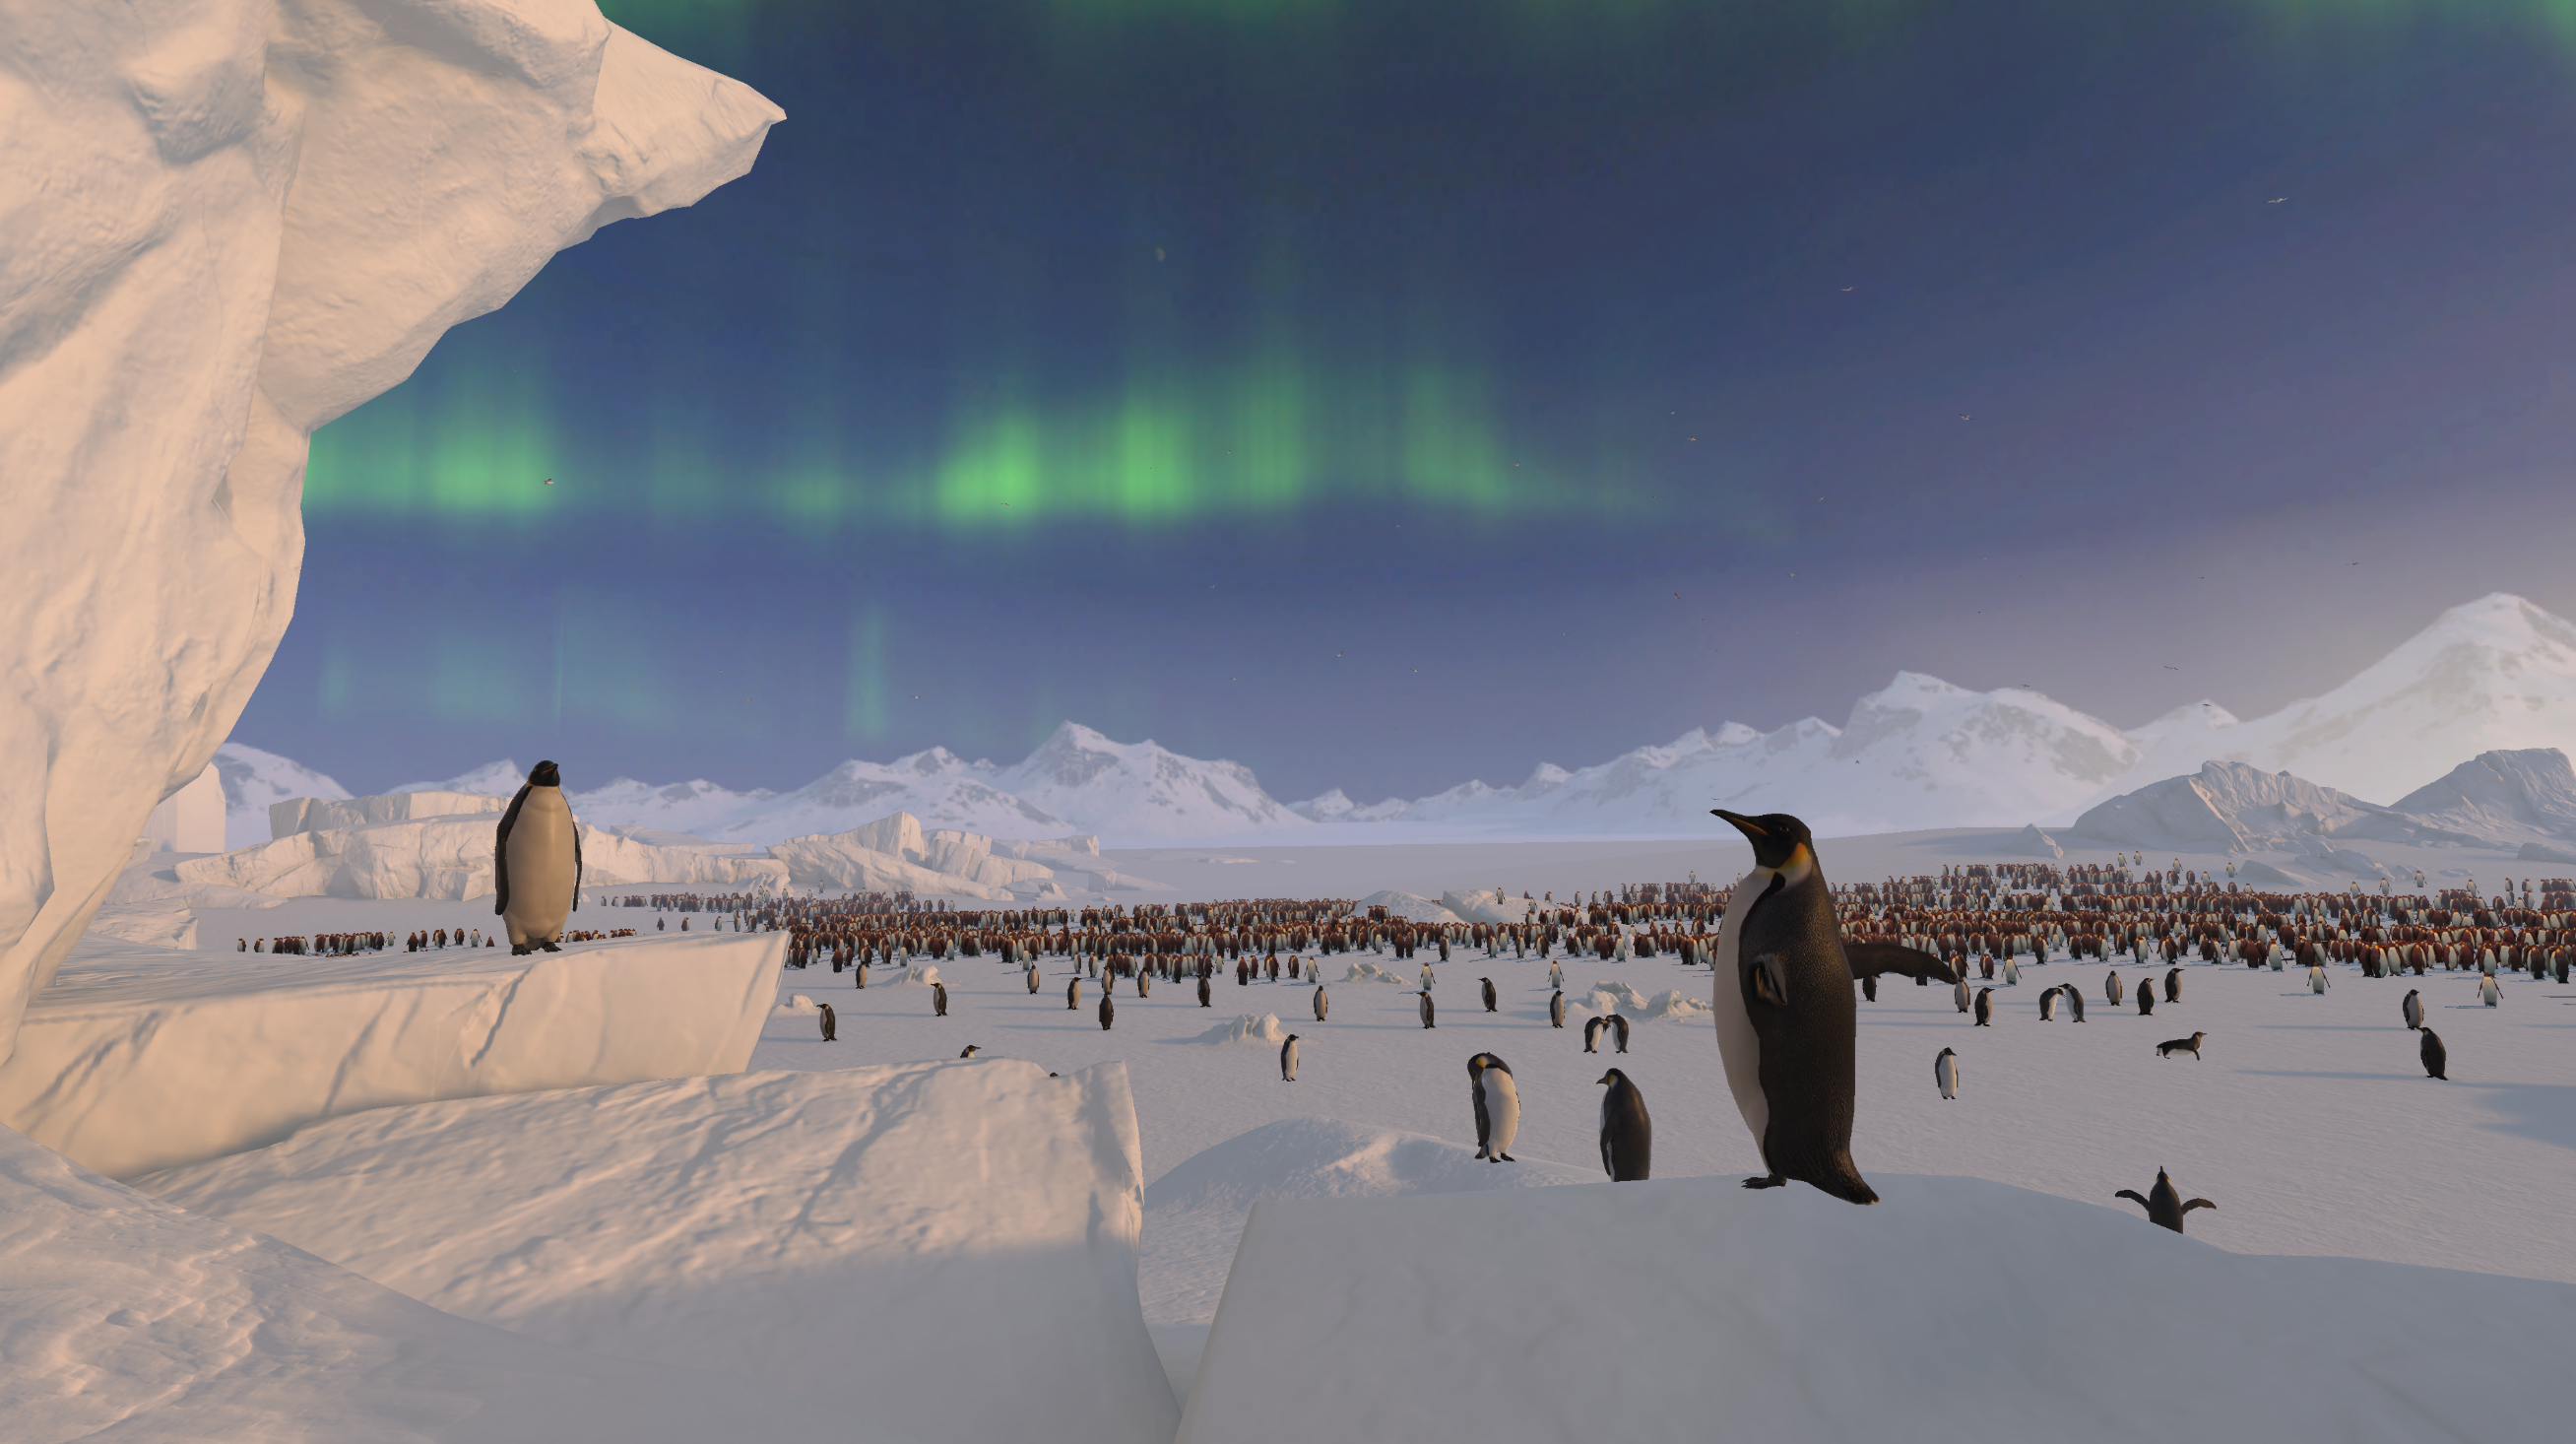 Penguins covering an icy plateau, with aurora in the sky